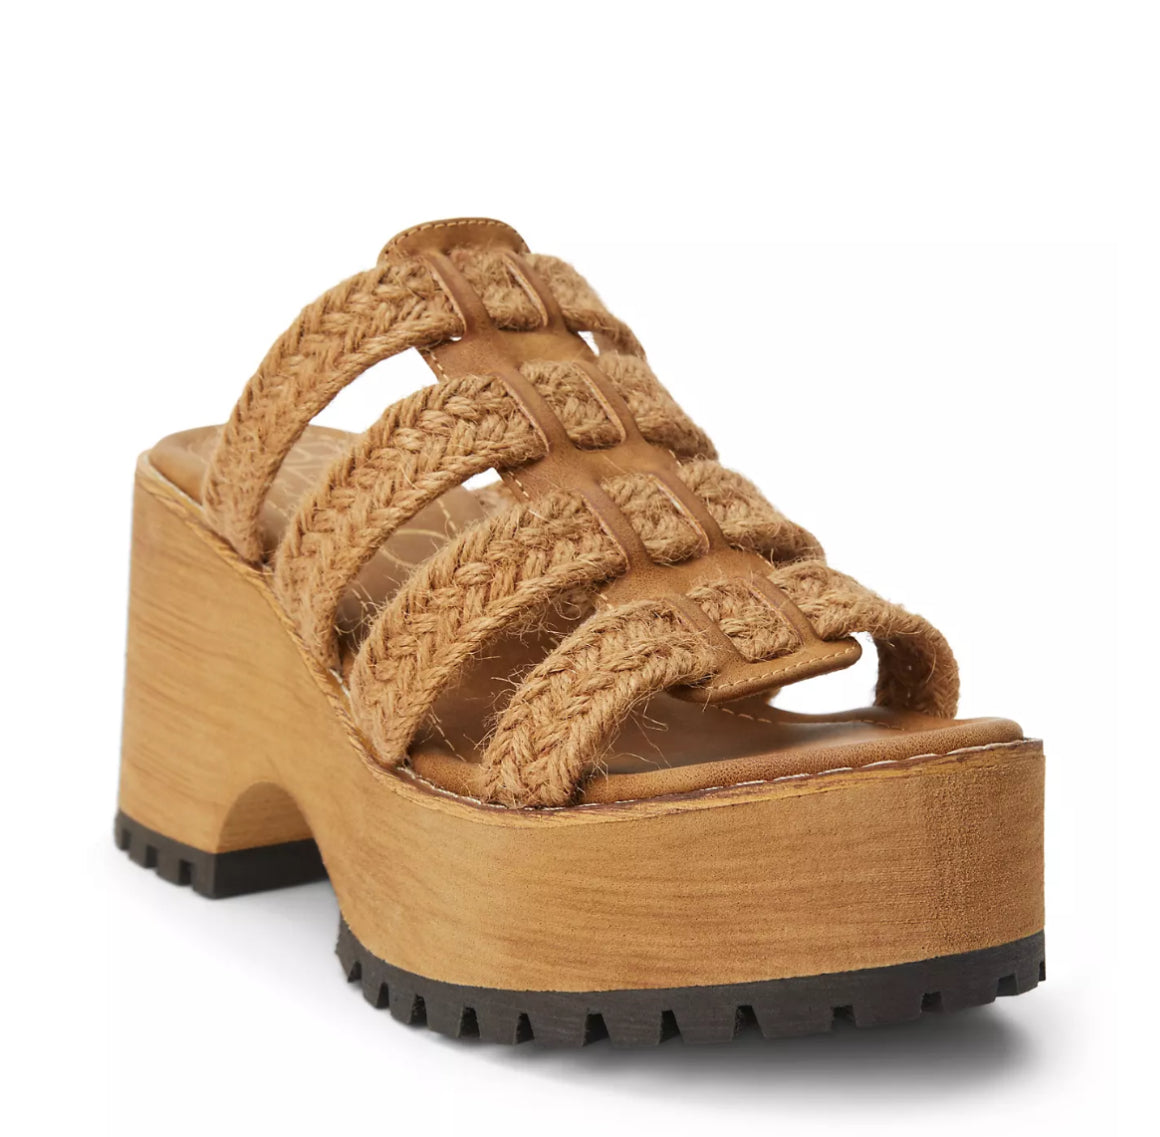 Step into summer with Daze sandals. Made from lightweight materials with a light brown finish, these wedges offer both style and comfort. With just a hint of height, you'll feel supported and walk with confidence.